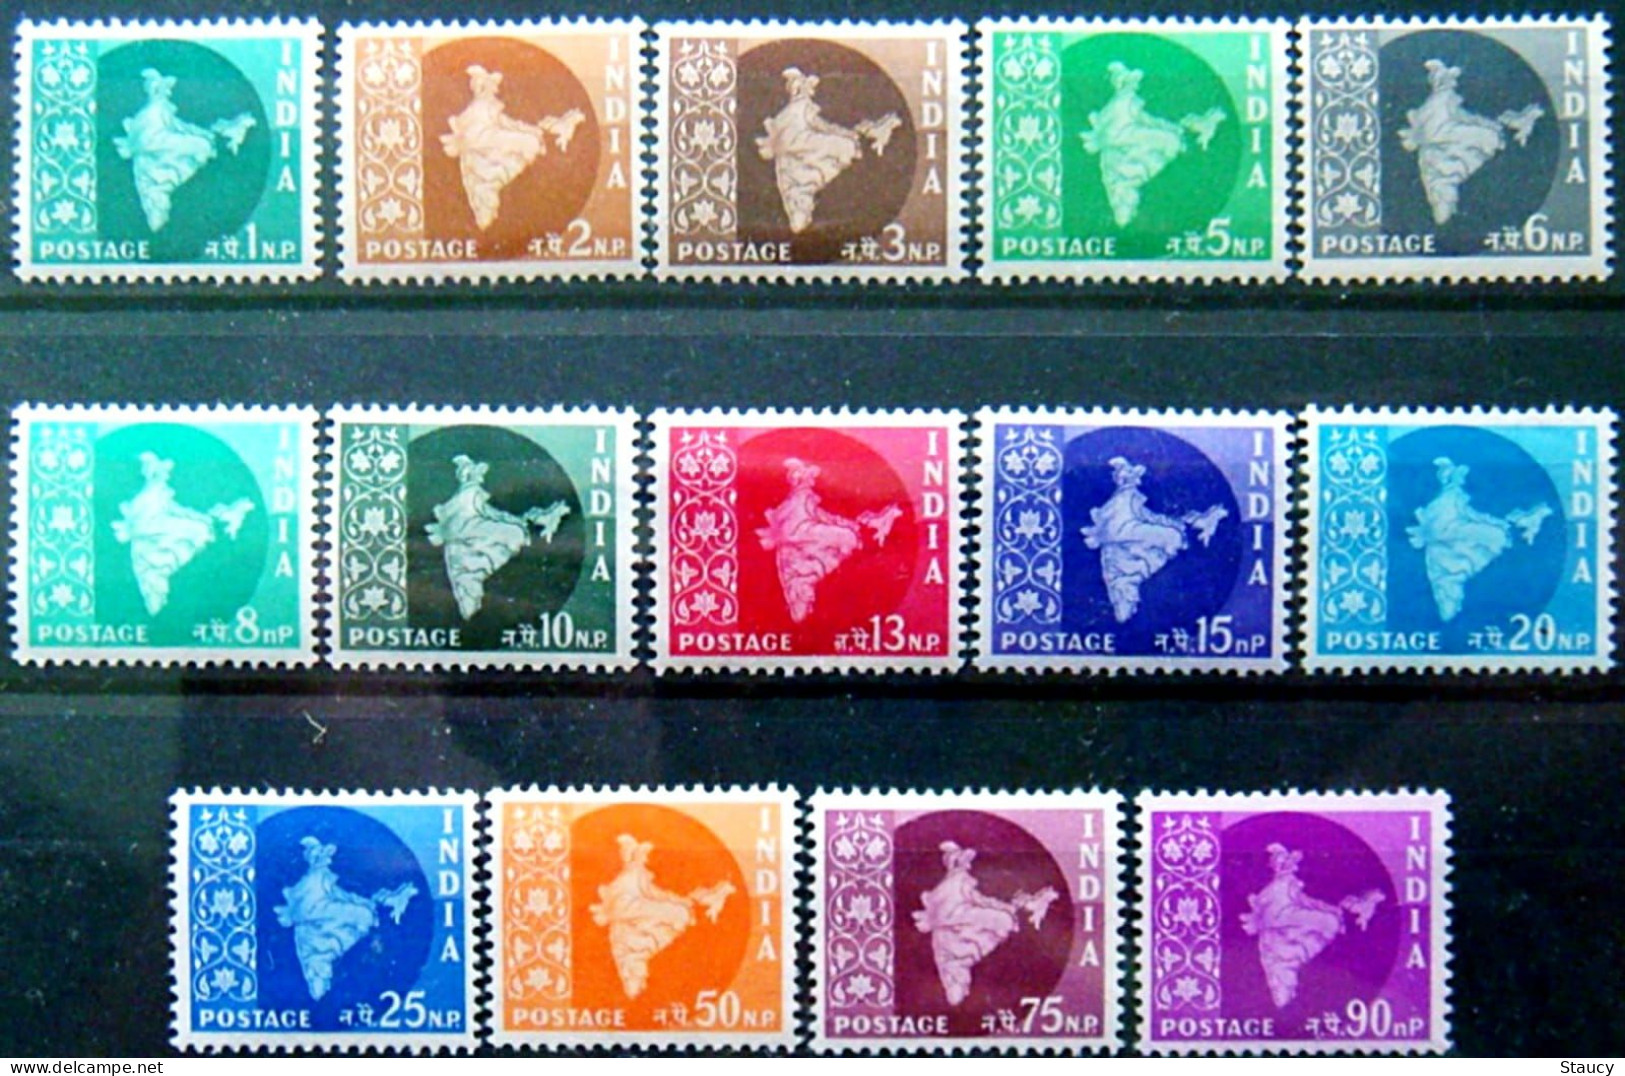 INDIA 1957 MAP Series COMPLETE 14v SET Star Watermark MNH, Very Fine, As Per Scan - Military Service Stamp